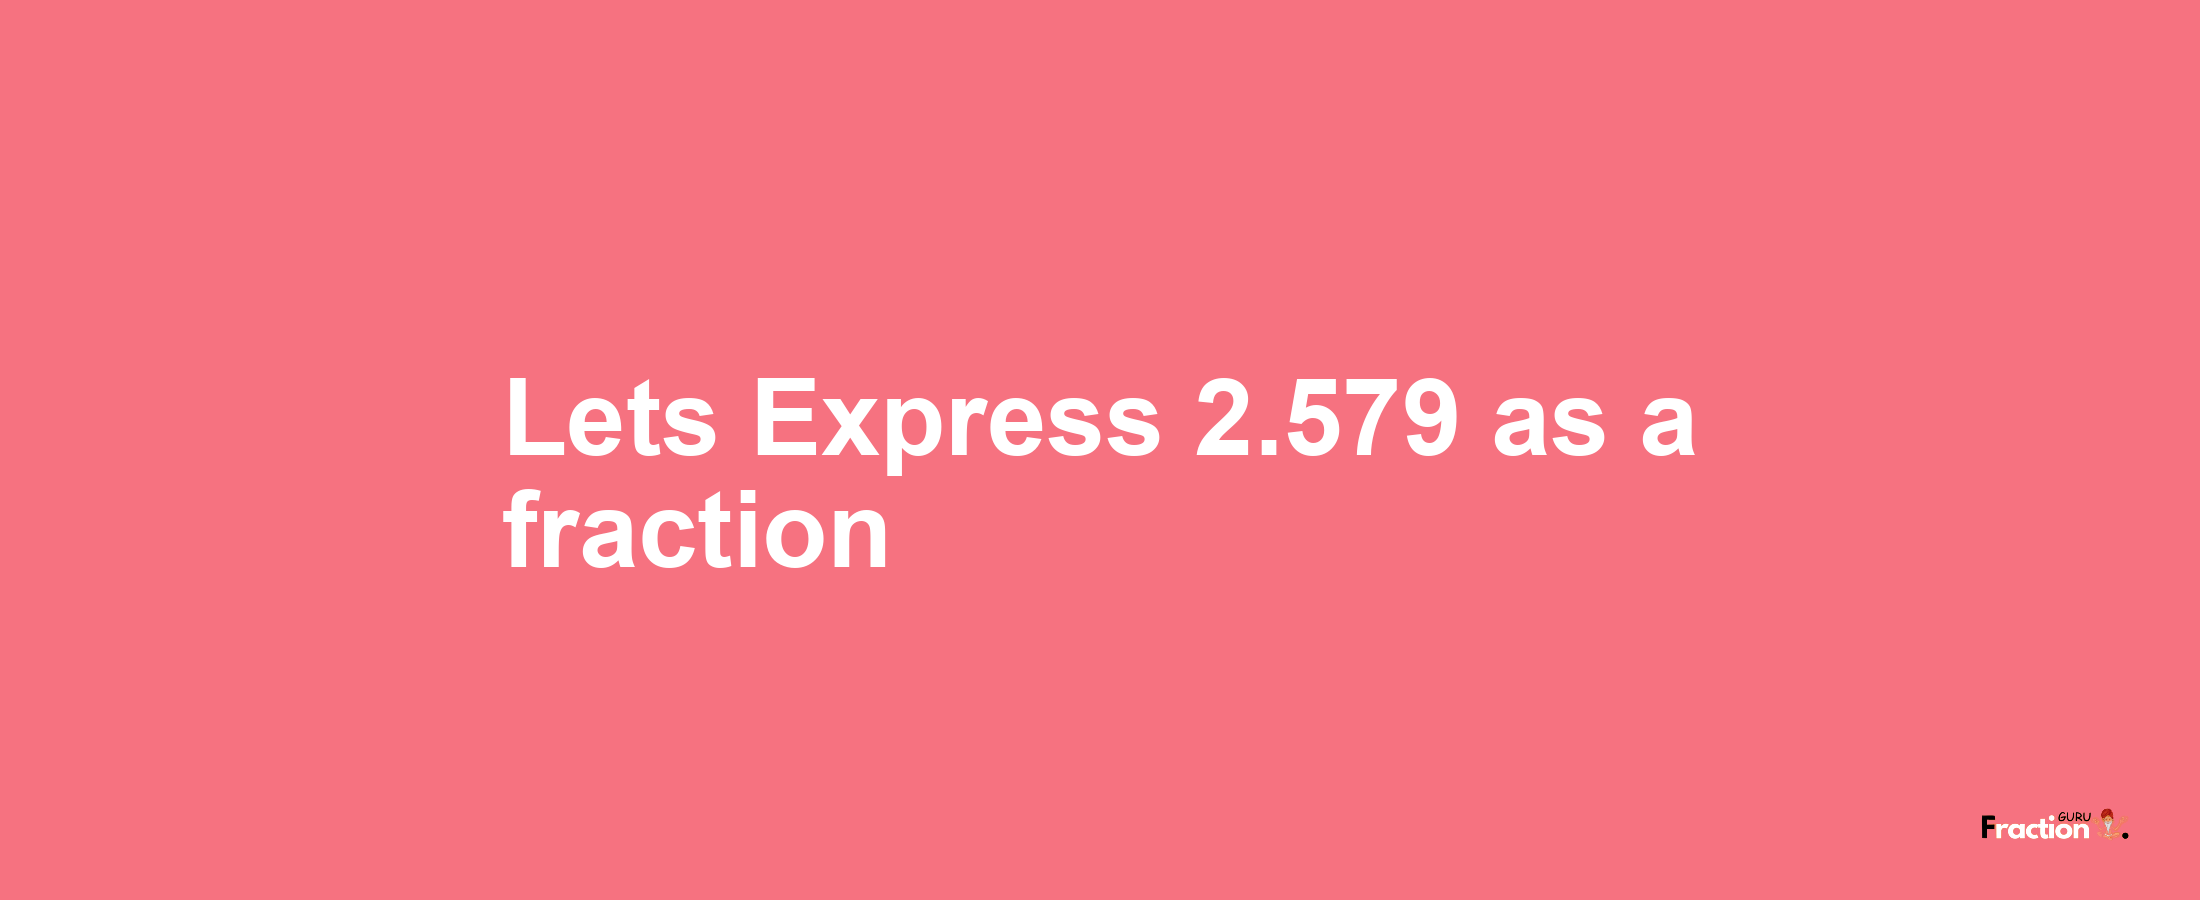 Lets Express 2.579 as afraction